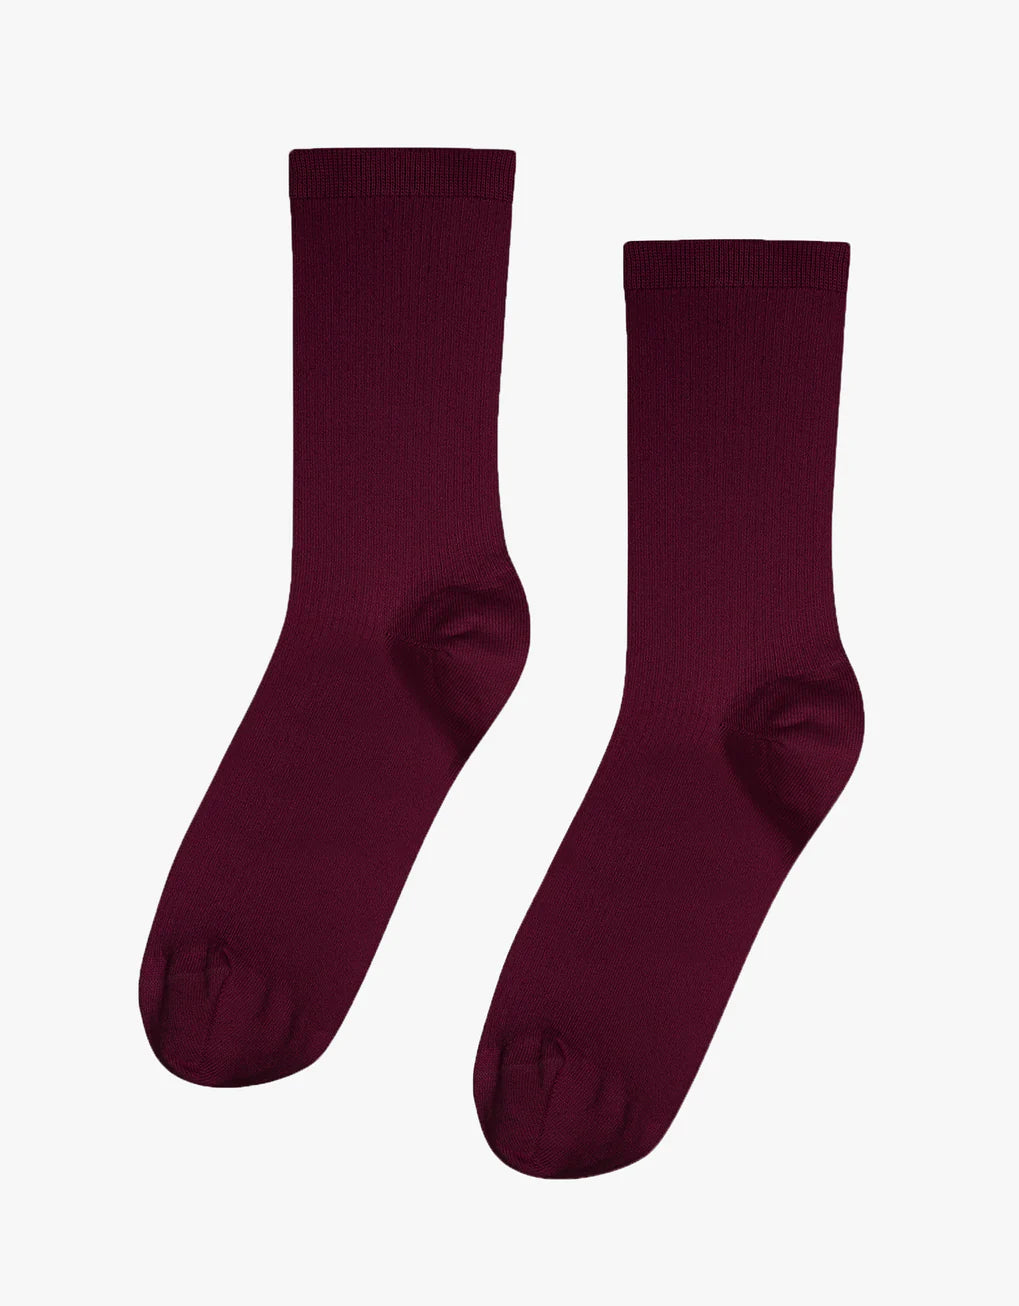 A pair of Colorful Standard Classic Organic Socks, maroon in color, seamless and breathable, made from organic cotton on a white background.